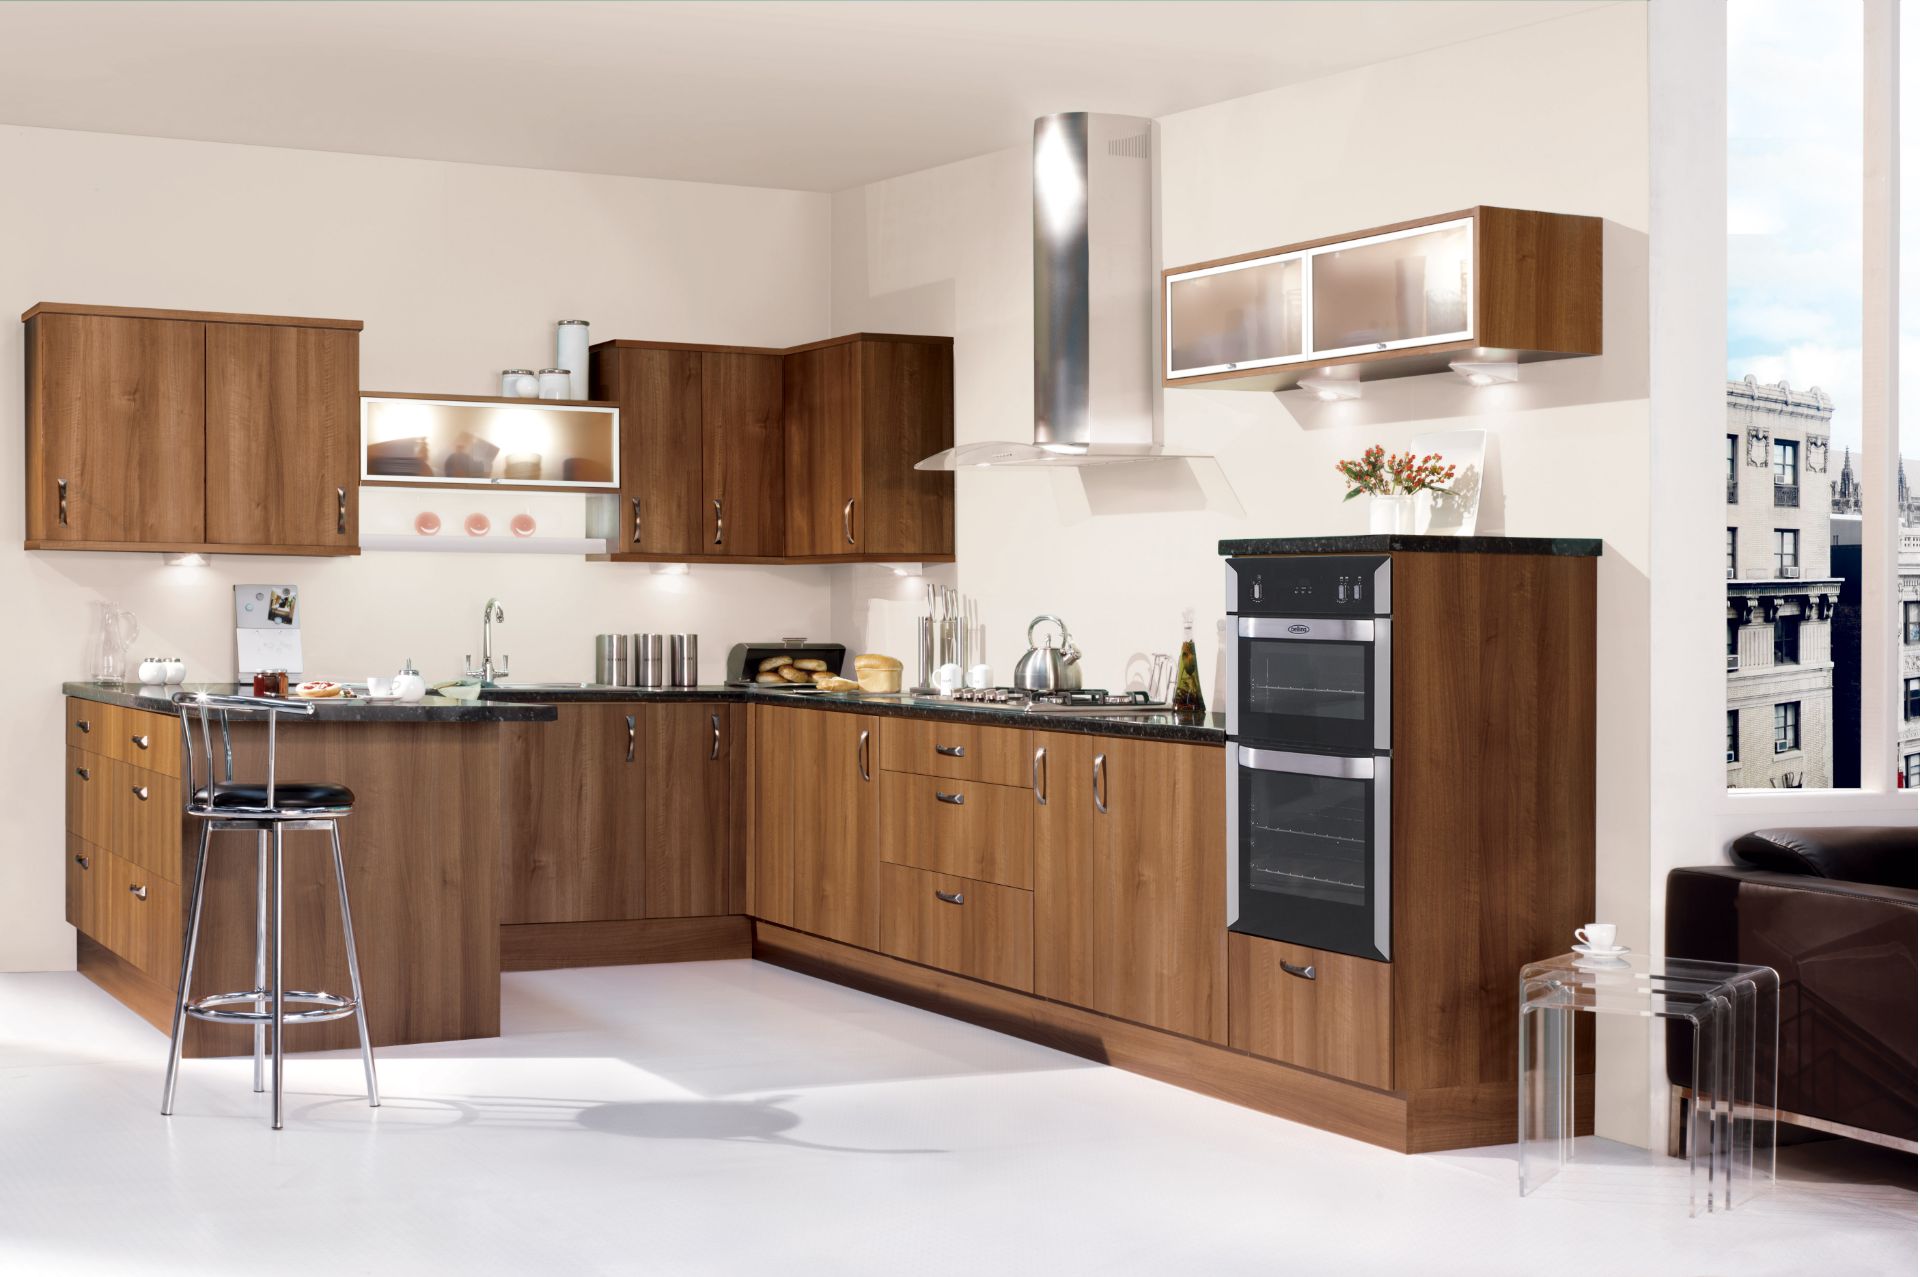 Resale Opportunity - Brand New Kitchen Stock in Walnut - CL160 - Lot comprises of approx 1,200